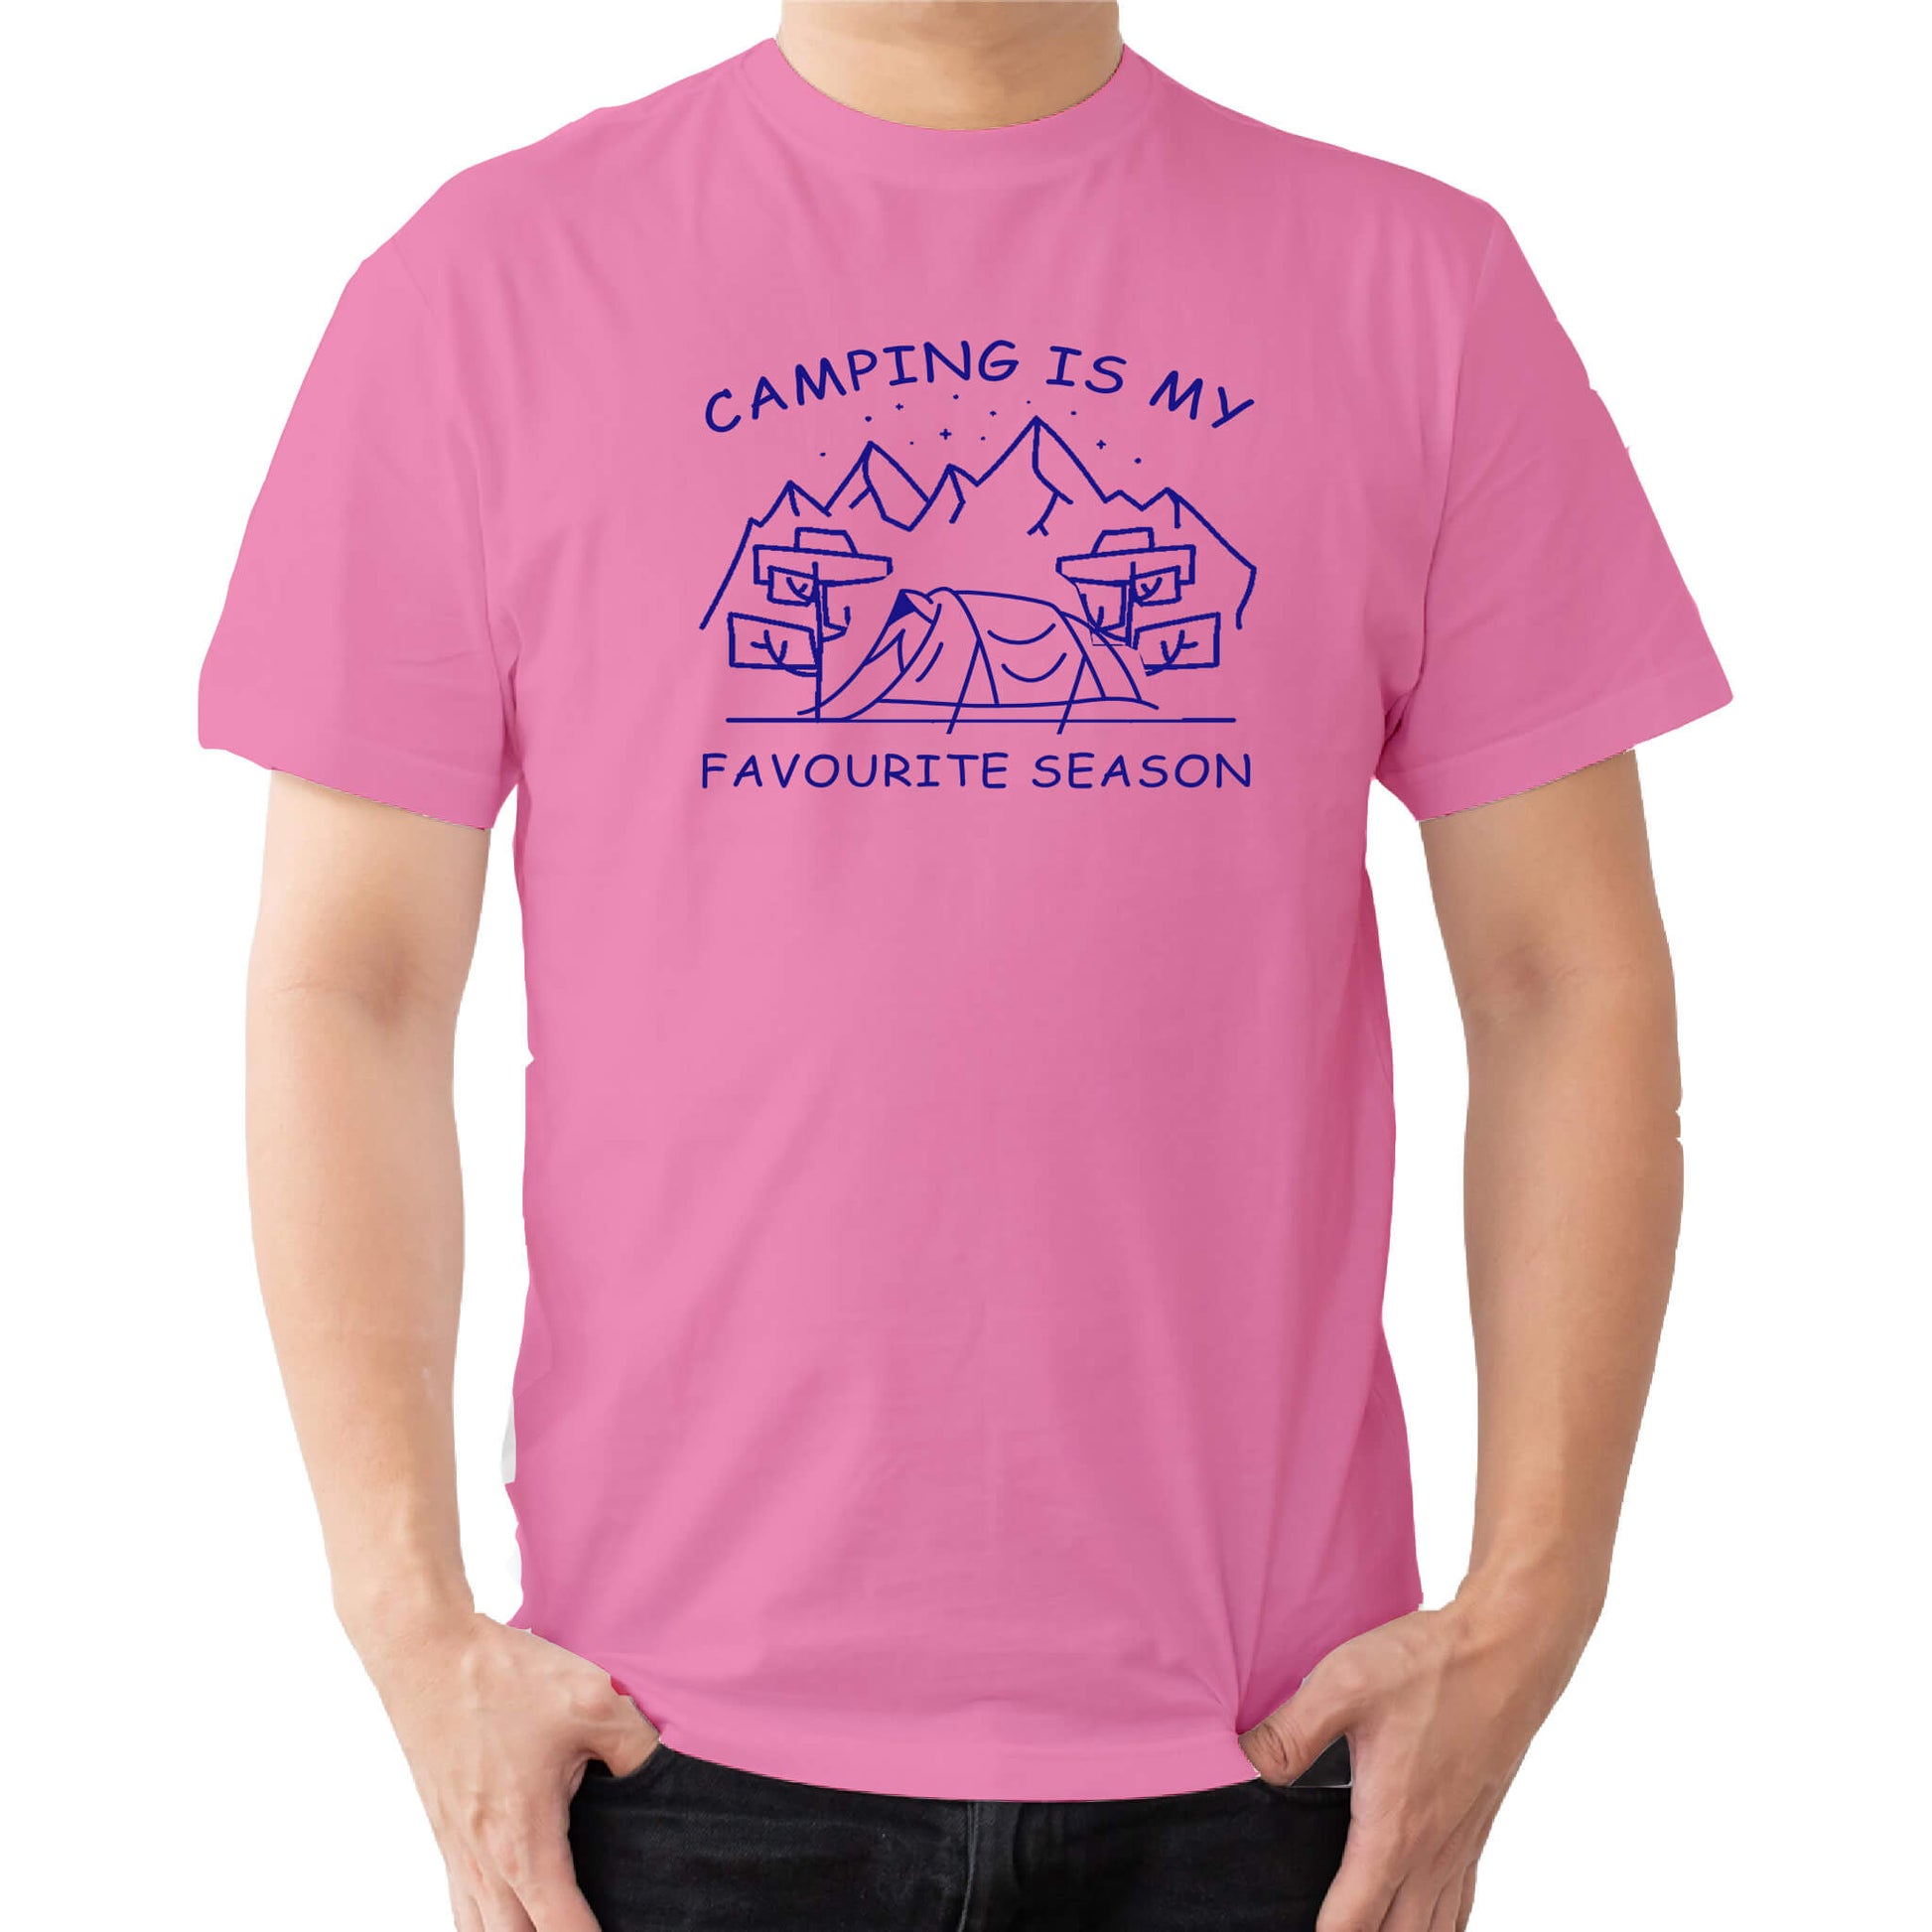  "Pink Graphic tee with an illustration of a tent, surrounded by nature. Text reads: 'Camping is my favorite season.' Celebrate the great outdoors!"